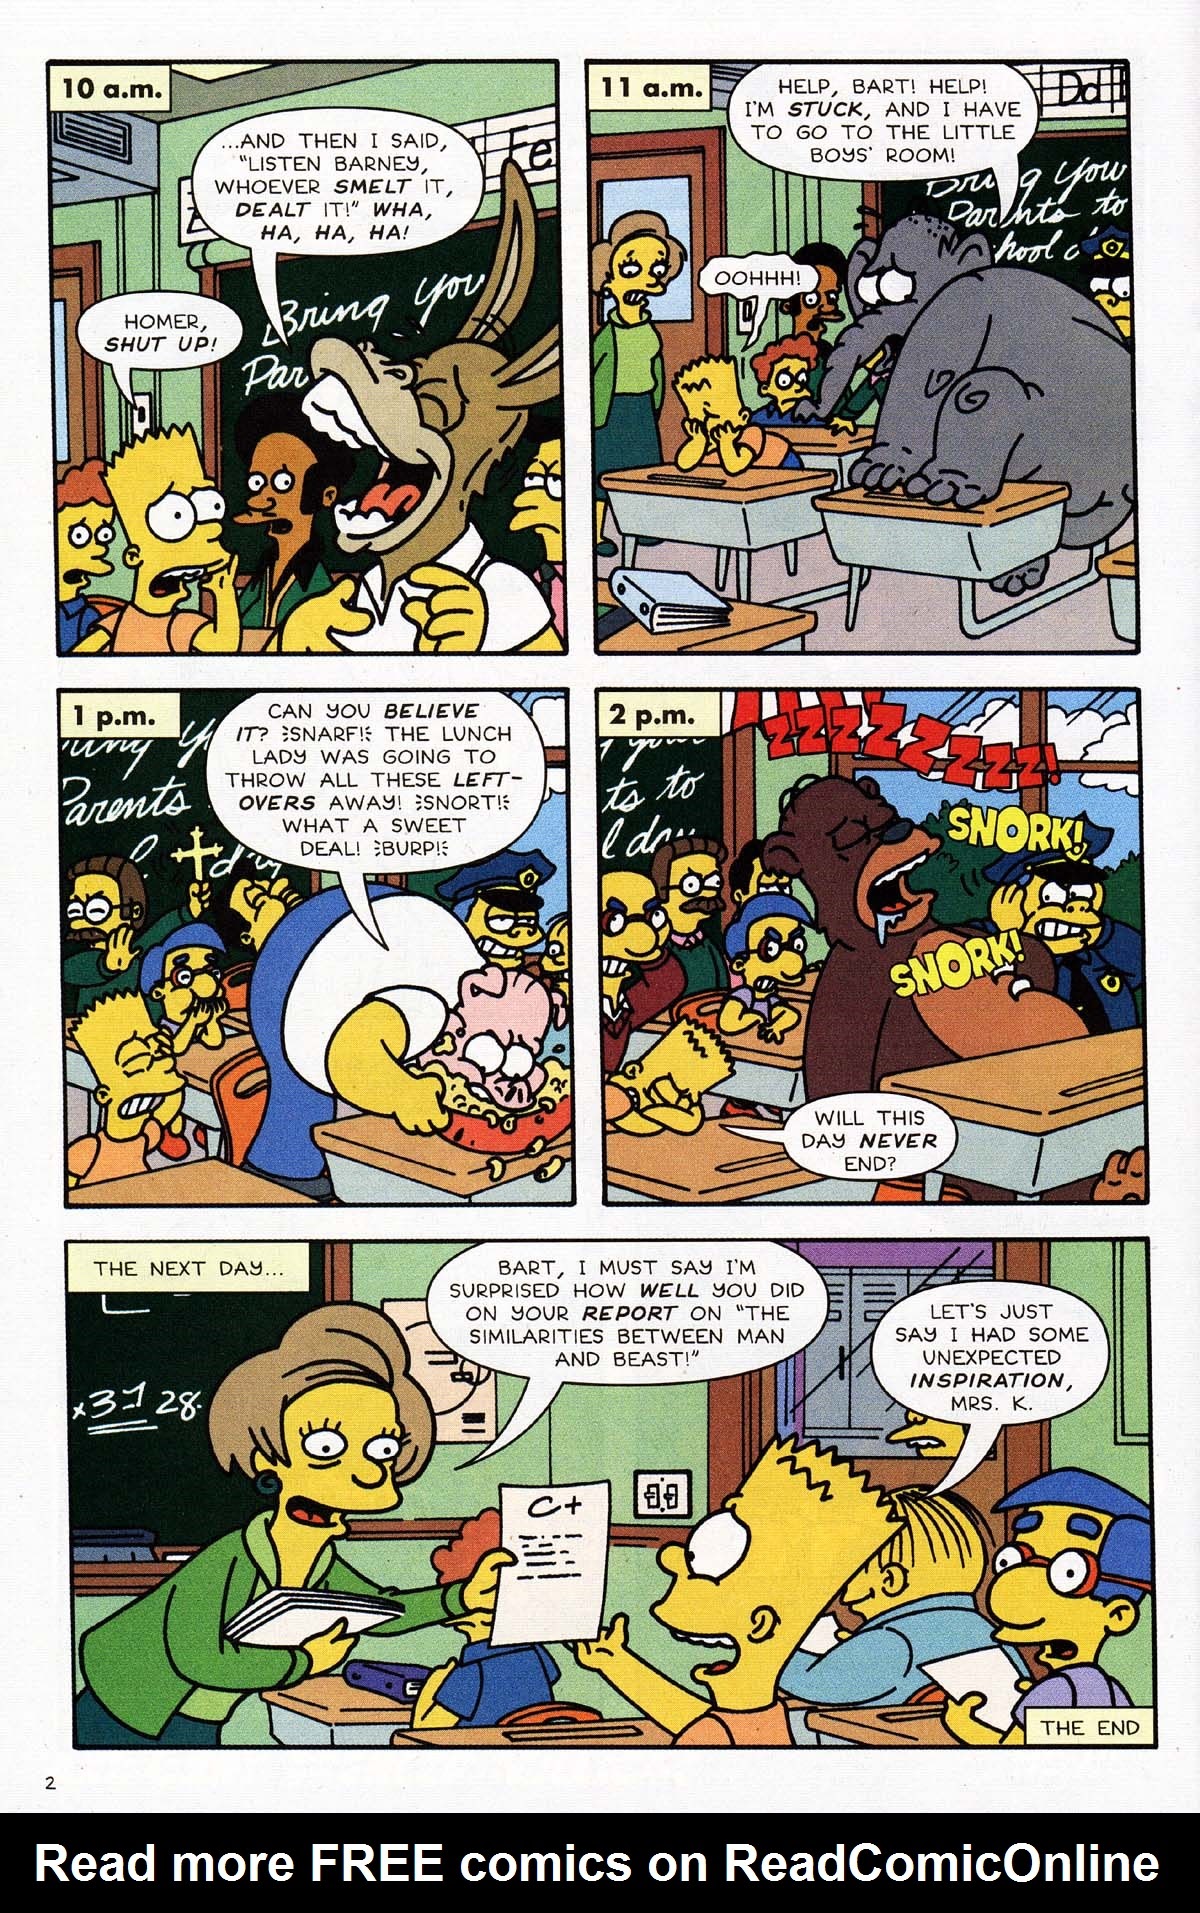 Read online Bart Simpson comic -  Issue #14 - 18